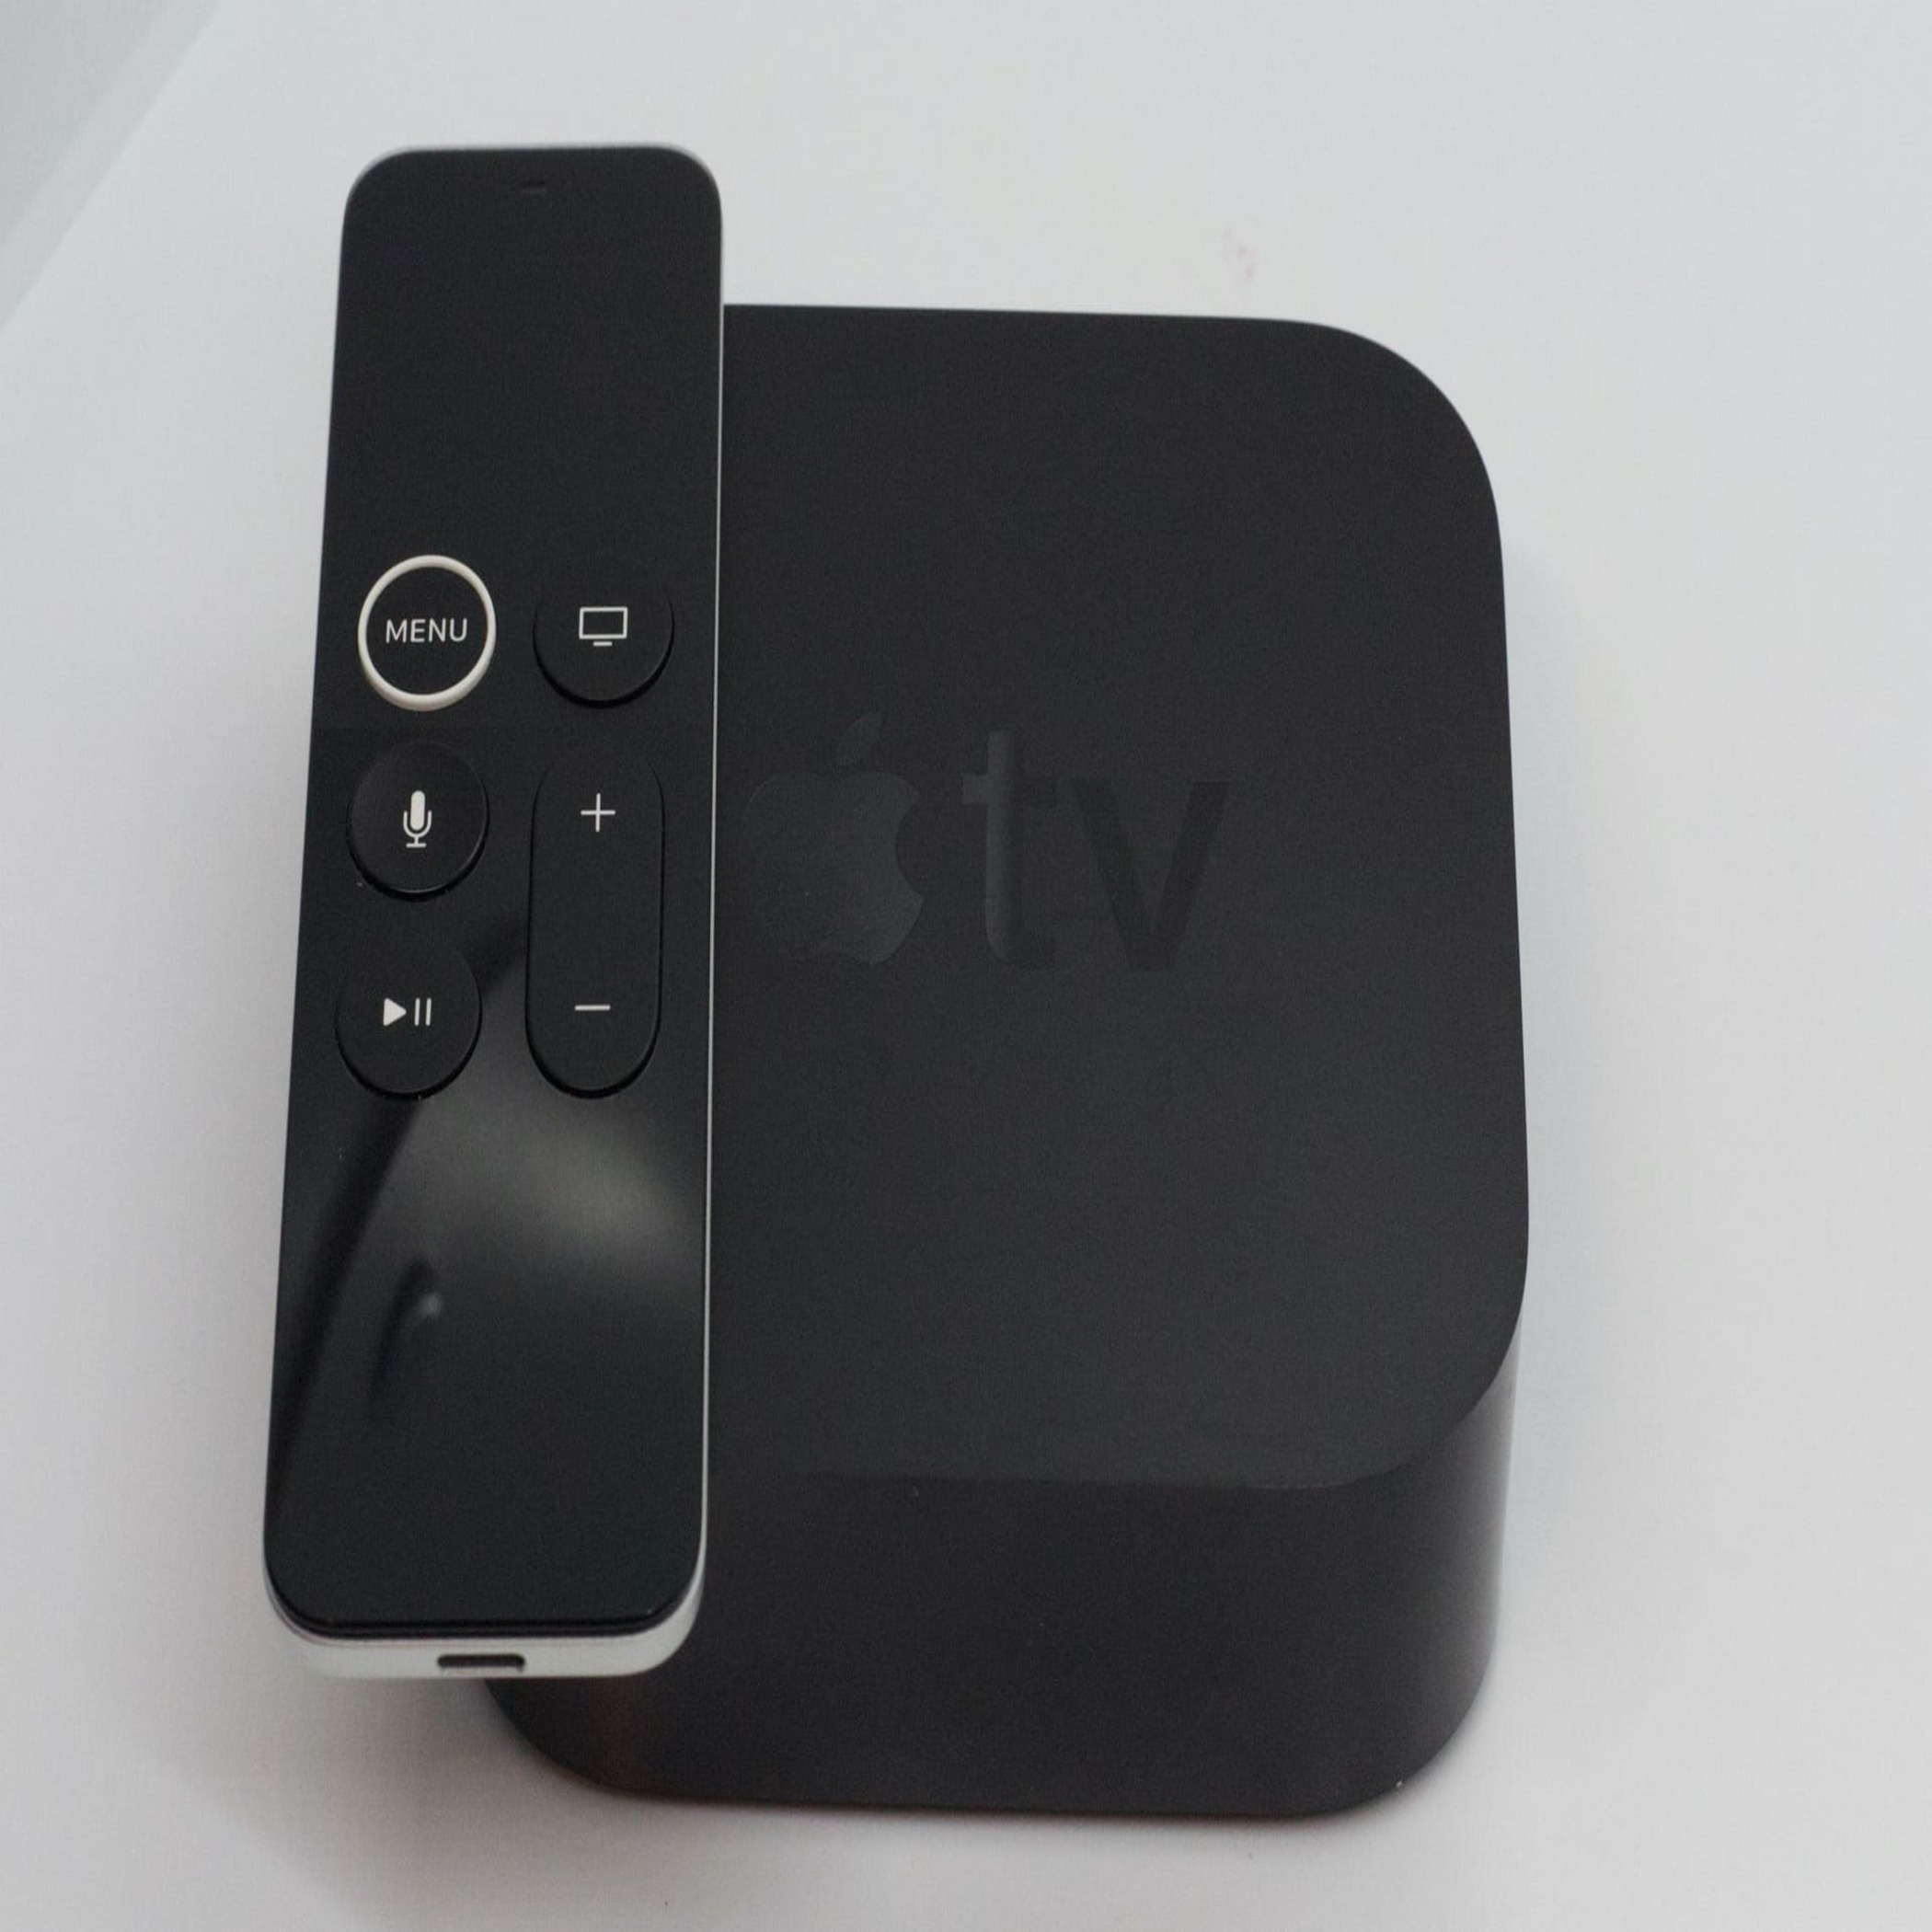 Read more about the article What is an Apple TV 4K? Detailed Explanation